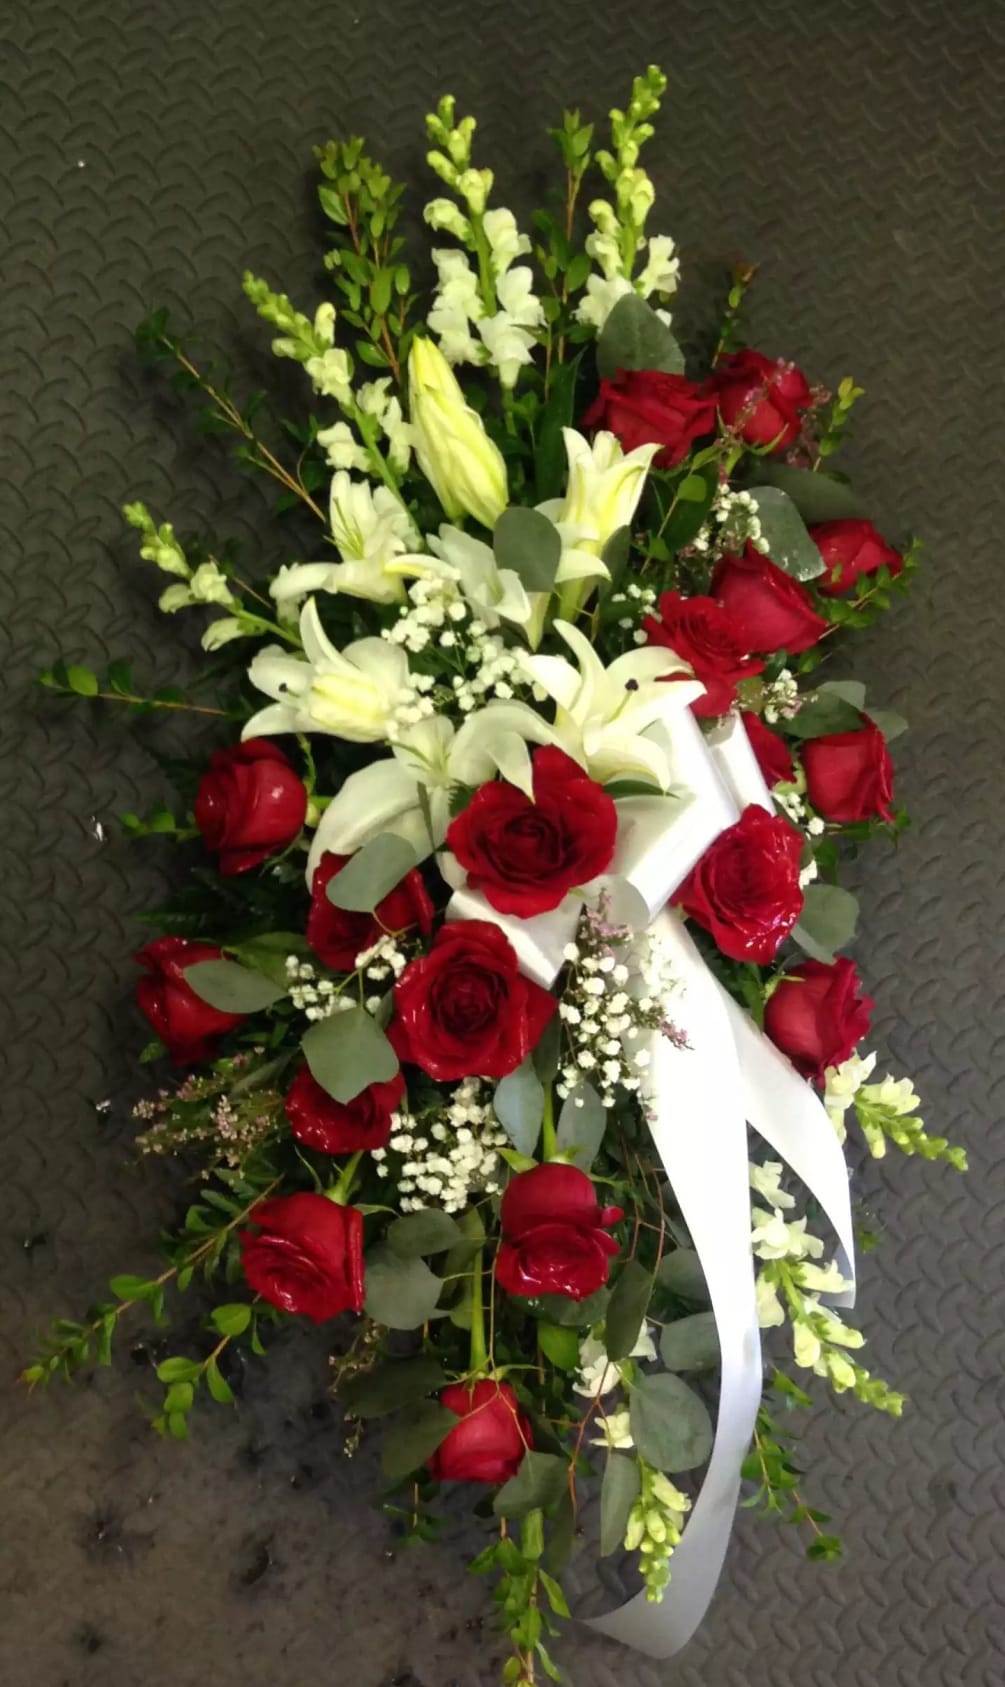 Red roses and any White flowers of your choosing